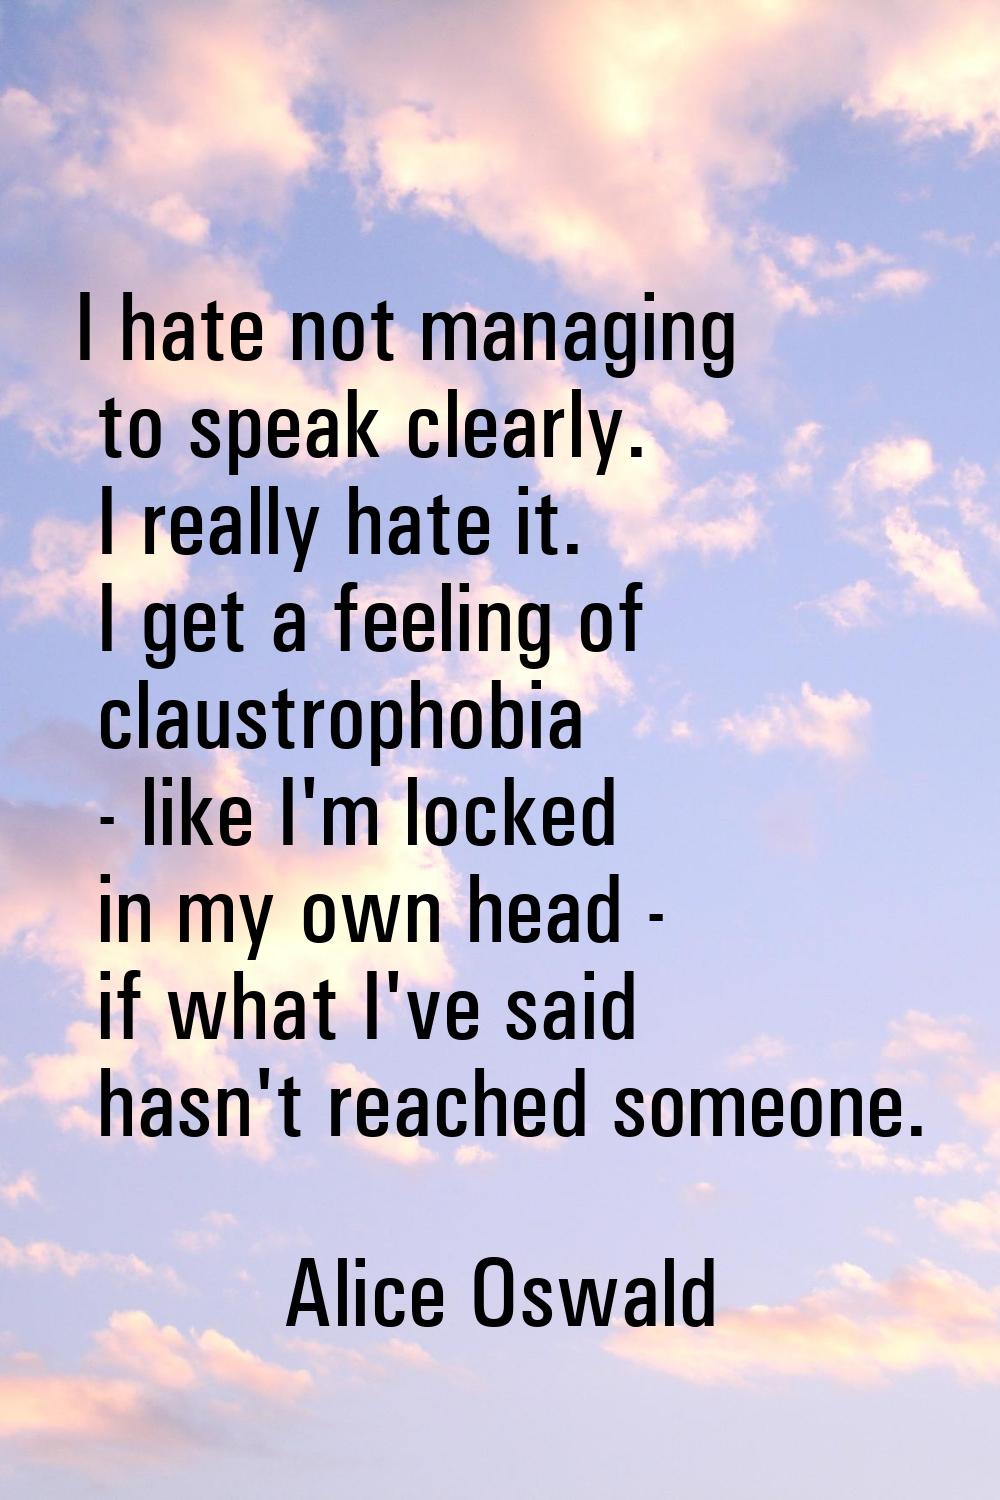 I hate not managing to speak clearly. I really hate it. I get a feeling of claustrophobia - like I'